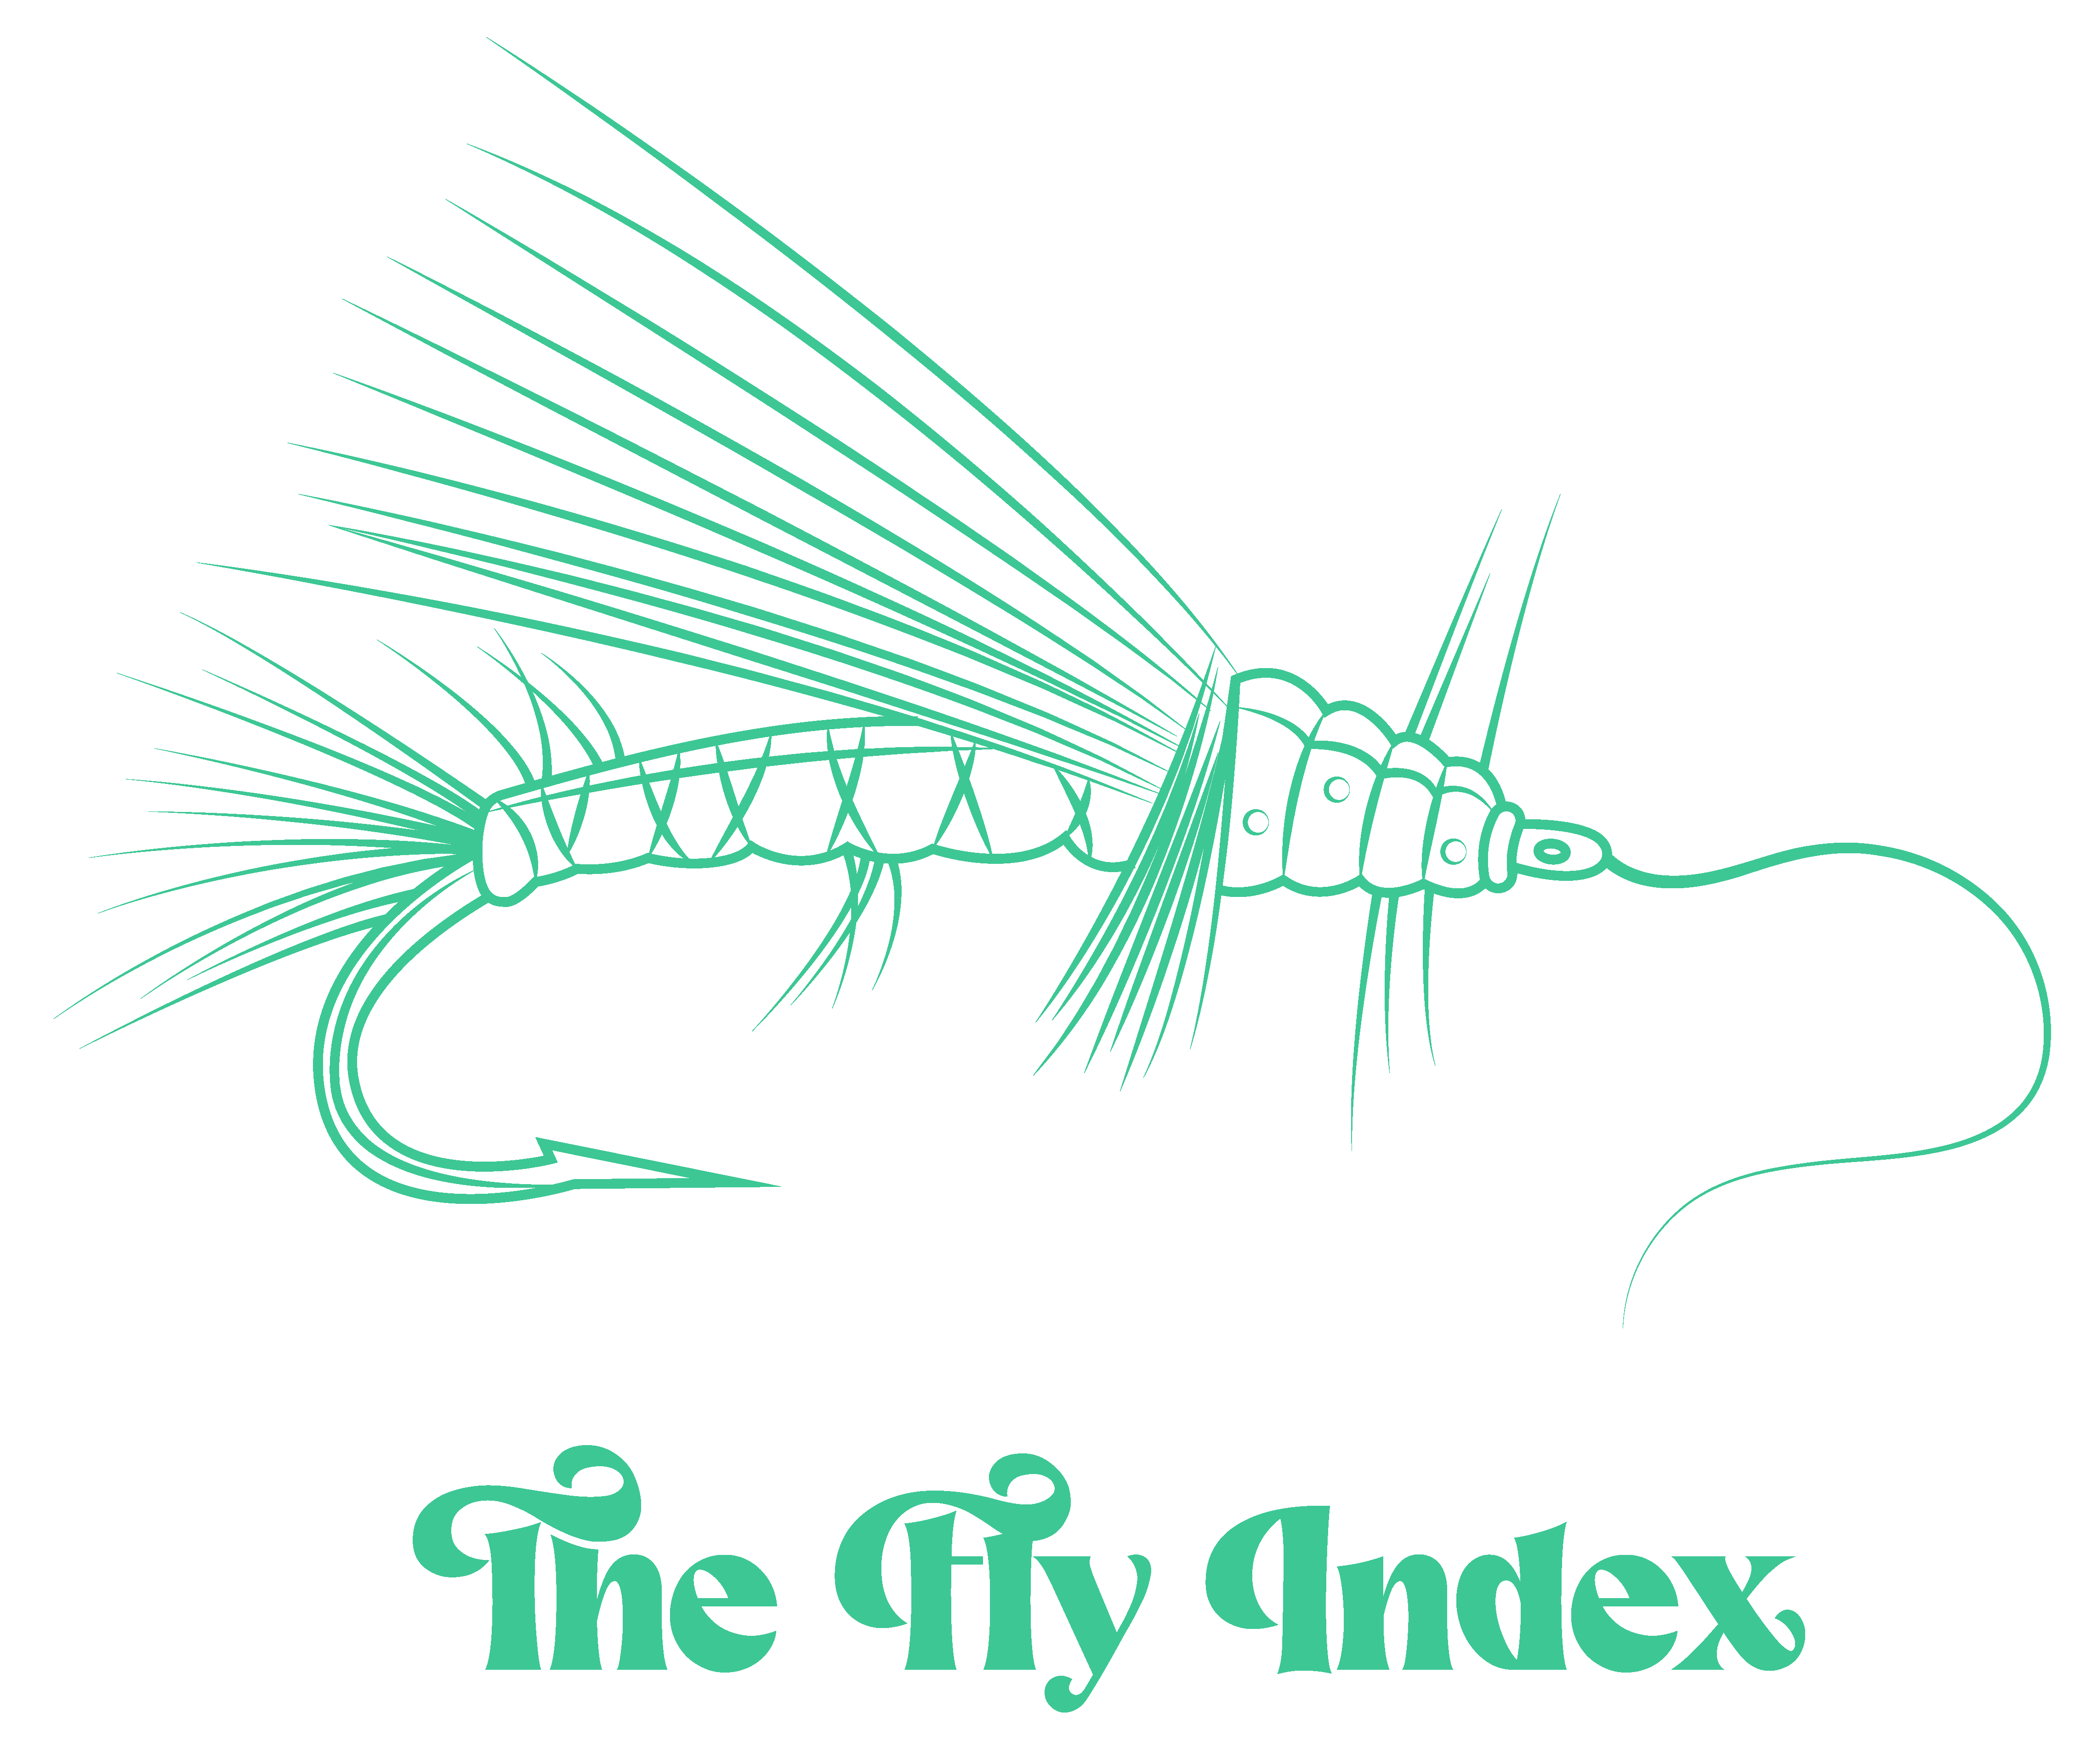 Add-newpattern - The Fly Index